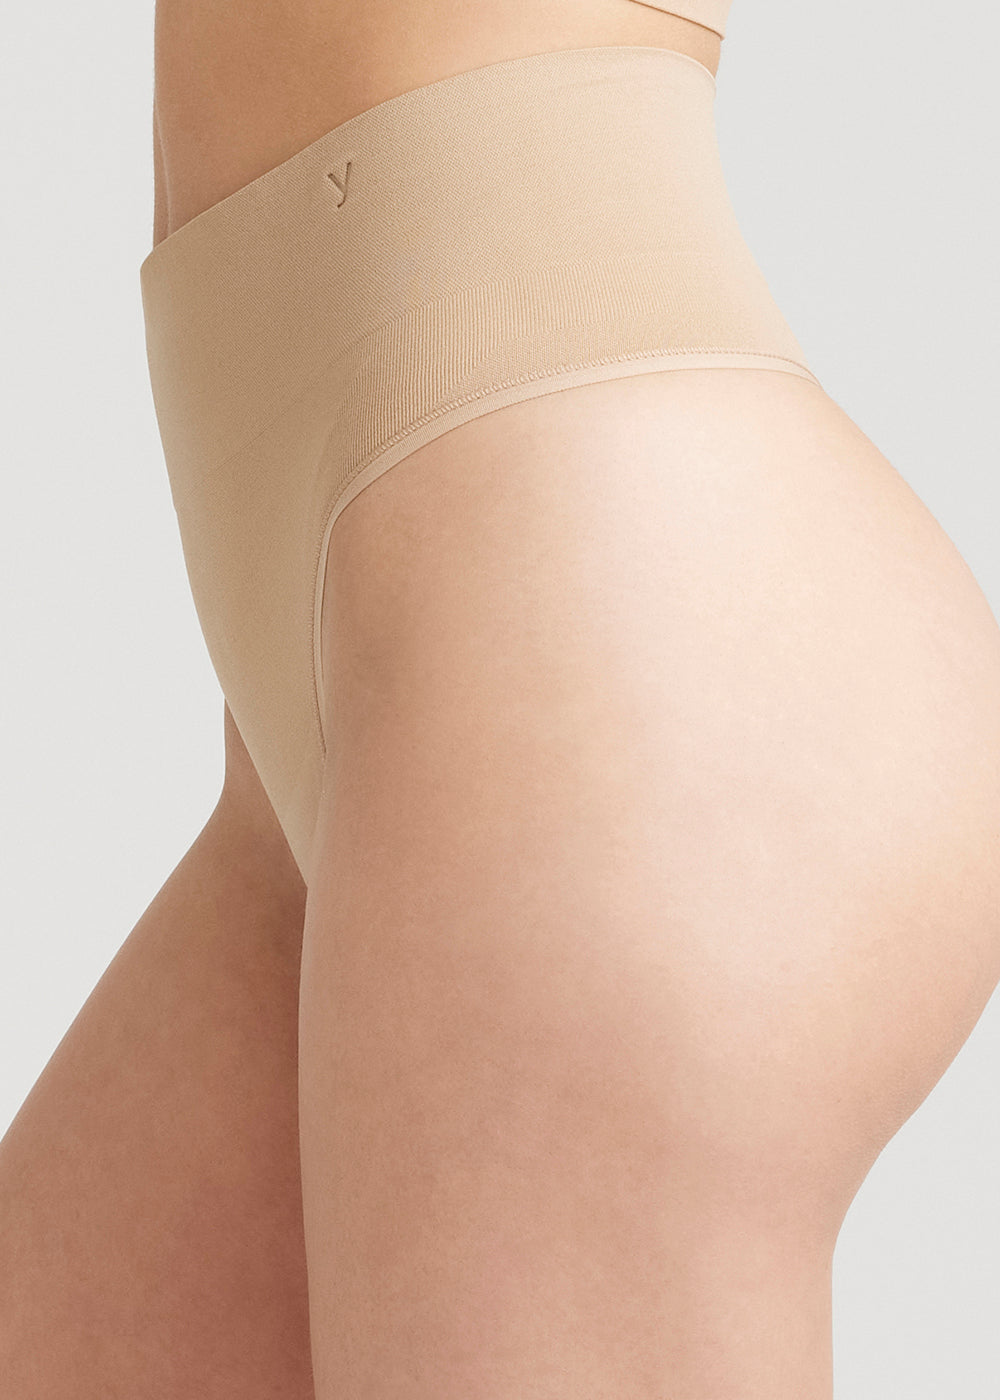 Liliana Comfortably Curved Smoothing Thong - Seamless from Yummie in Almond  - 1